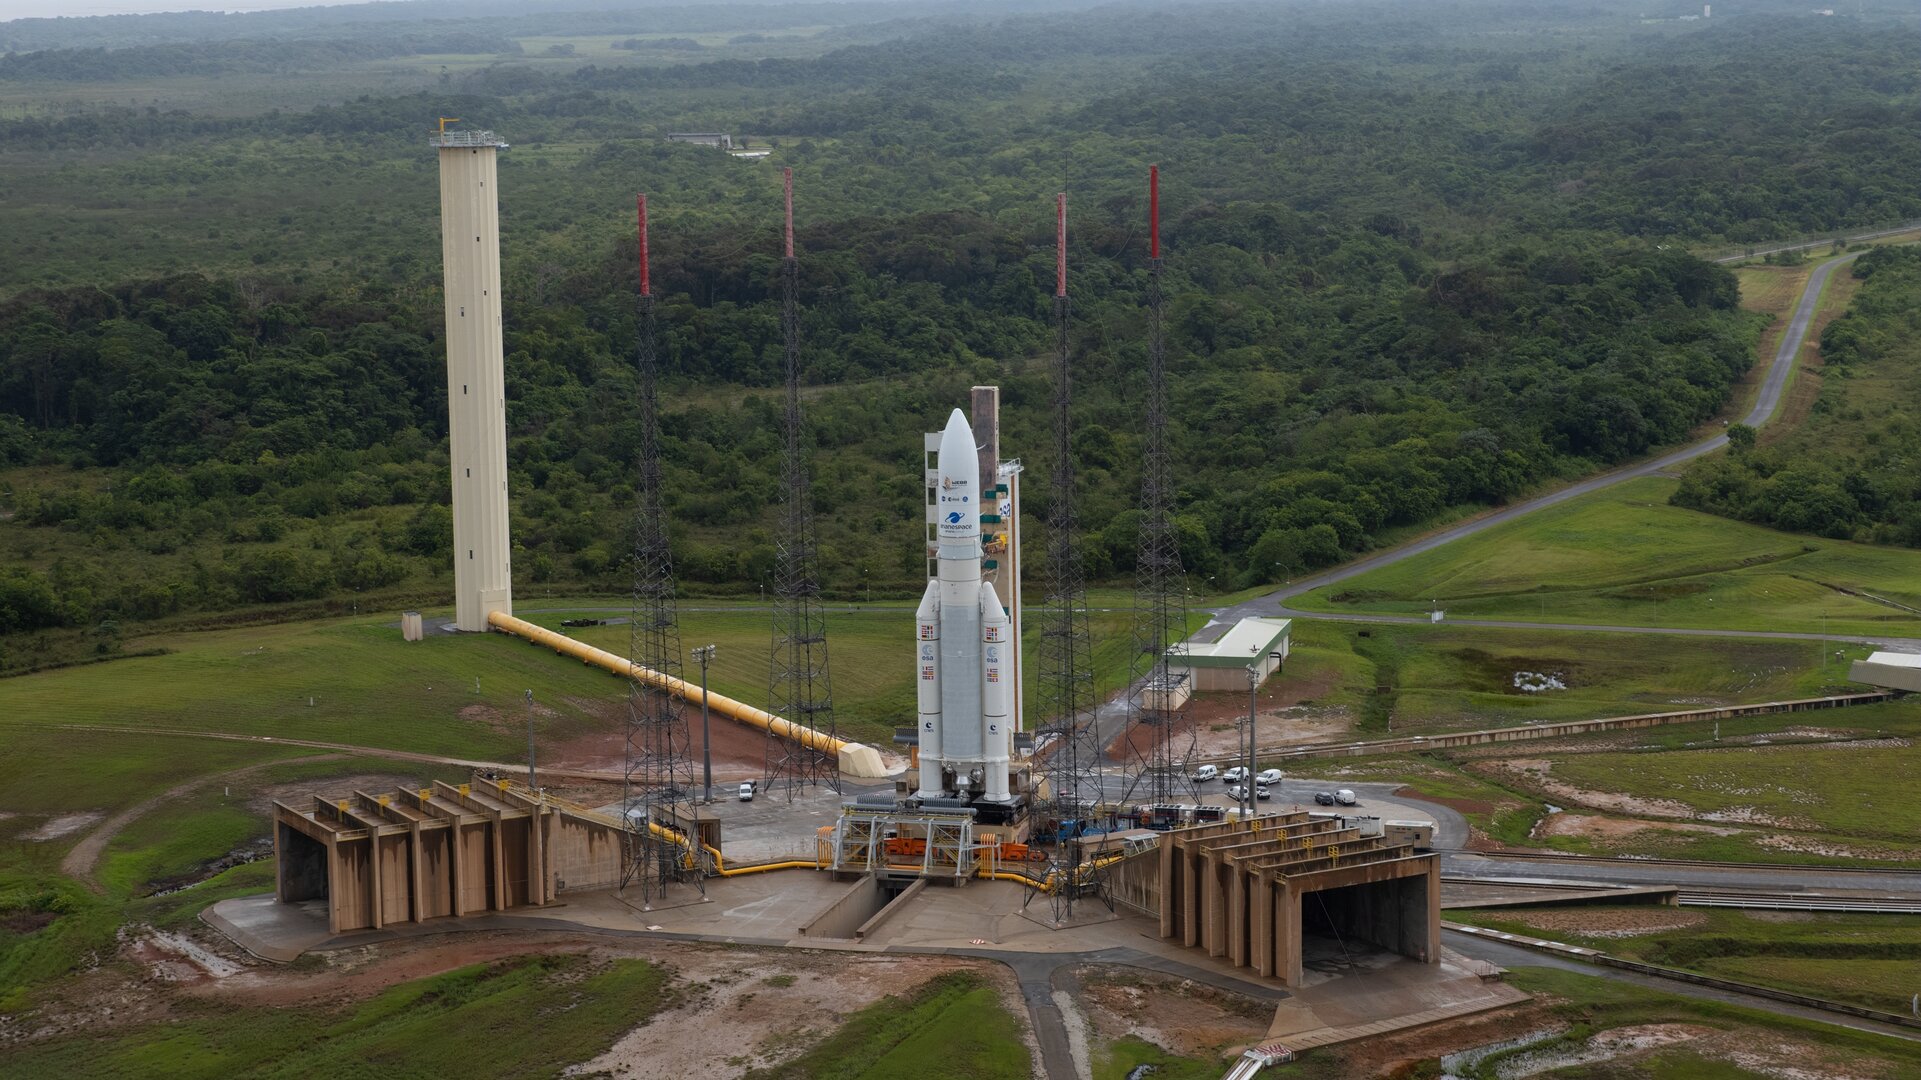 Webb on Ariane 5 roll-out to the launch pad